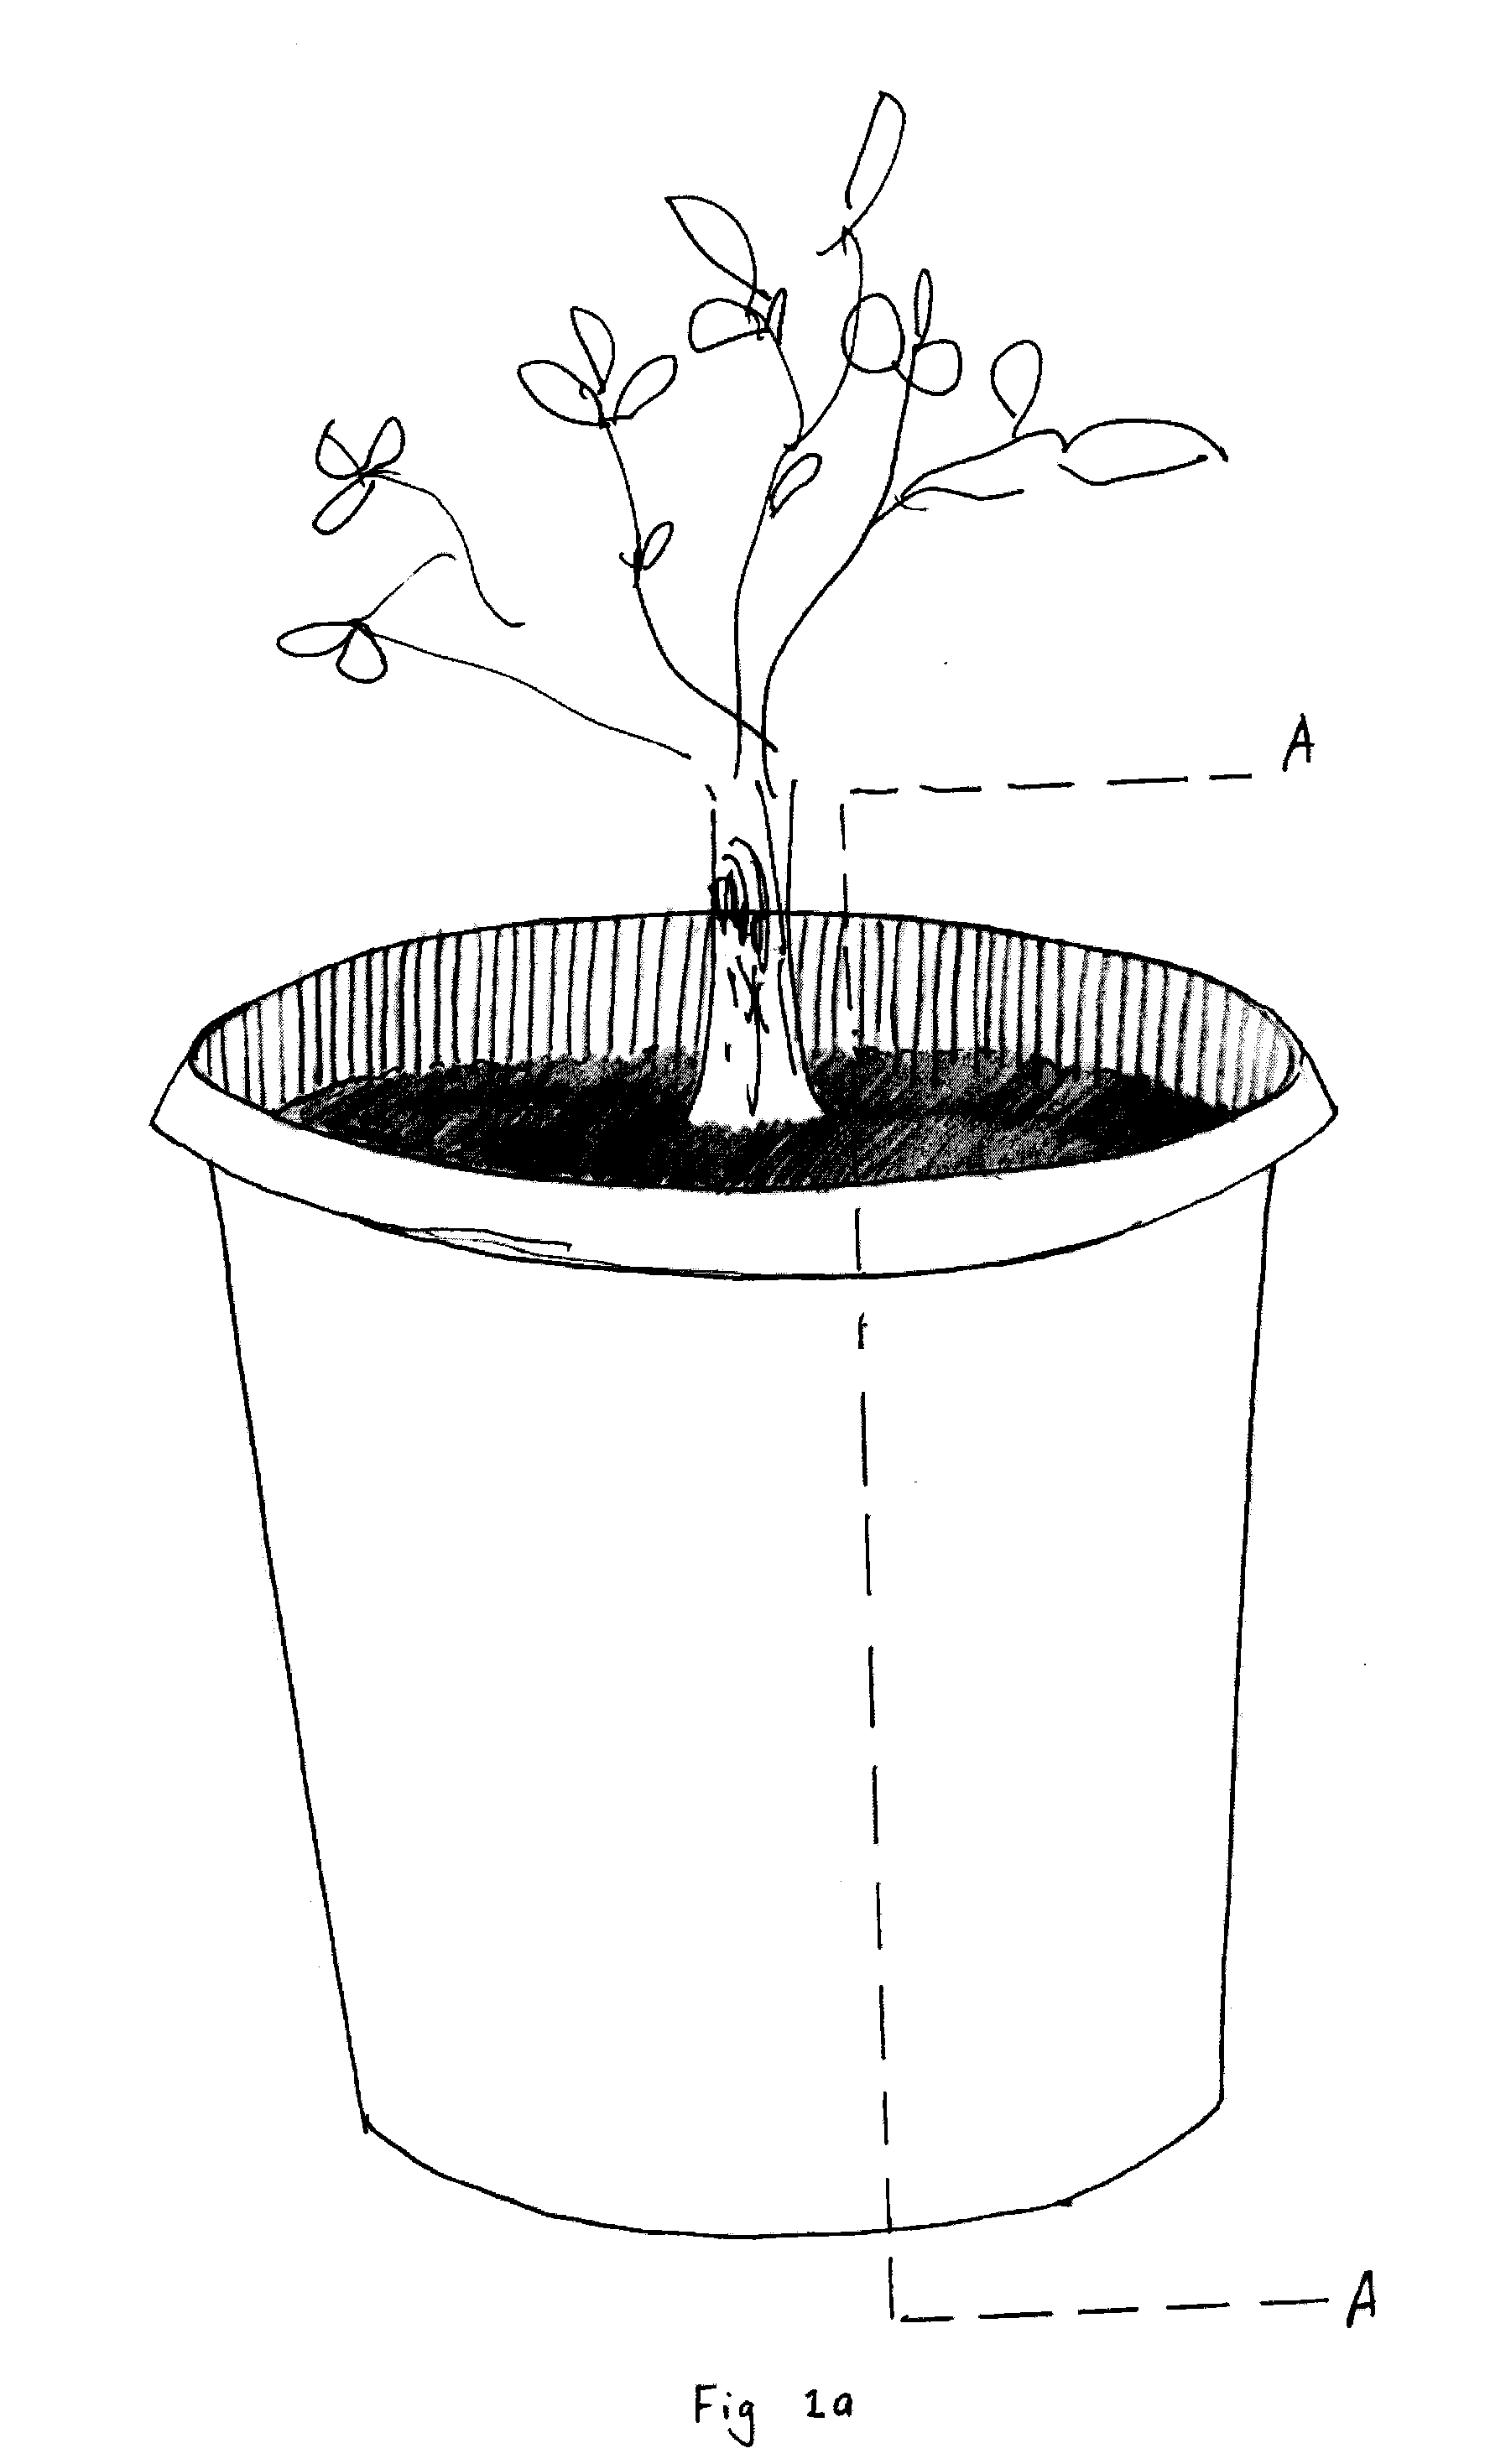 Apparatus to cultivate plants